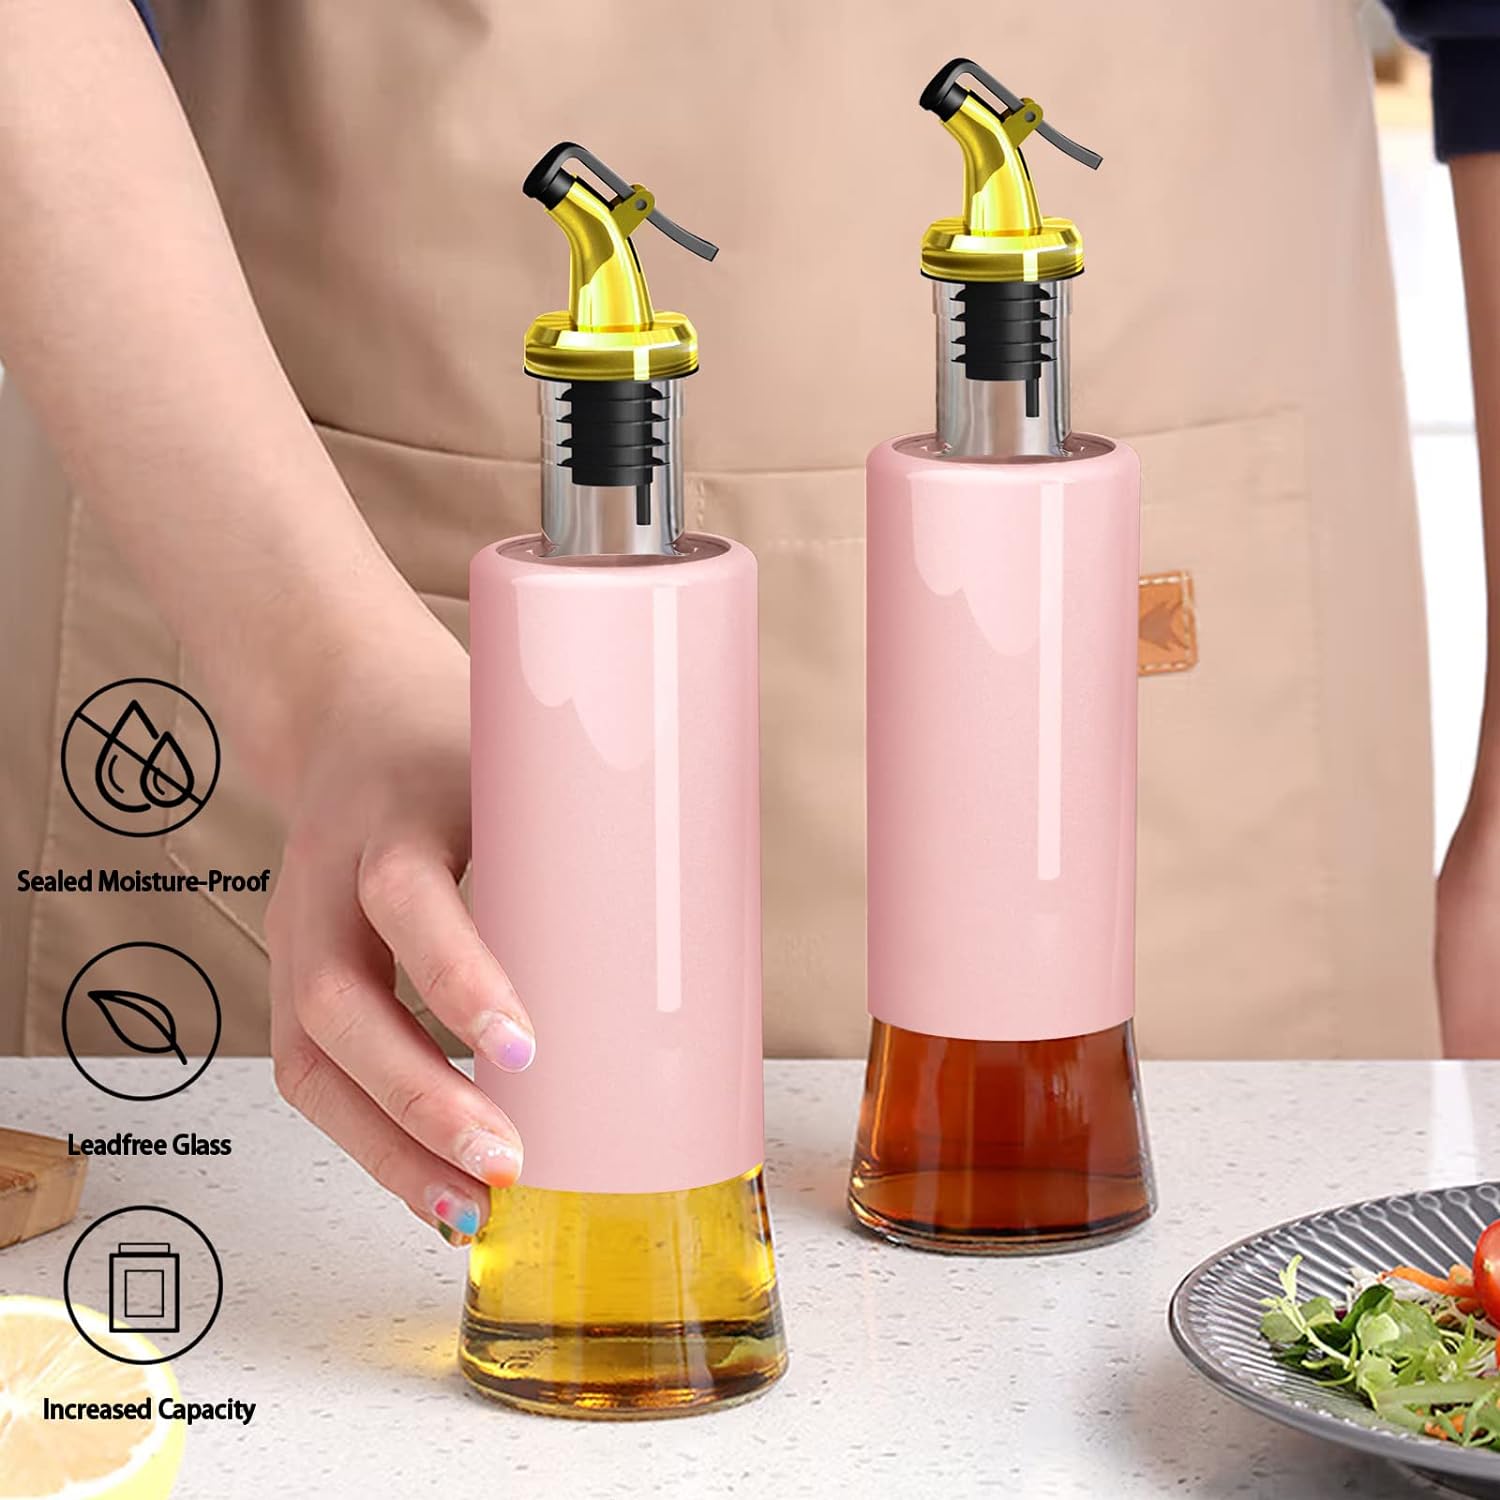 5526 300 ML Olive Oil Dispenser Bottle Leakproof Condiment Glass Container Non- Drip Spout Soy Sauce Vinegar Cruet Bottle for Kitchen Cooking BBQ Fry for Kicthen Home (300 ML)